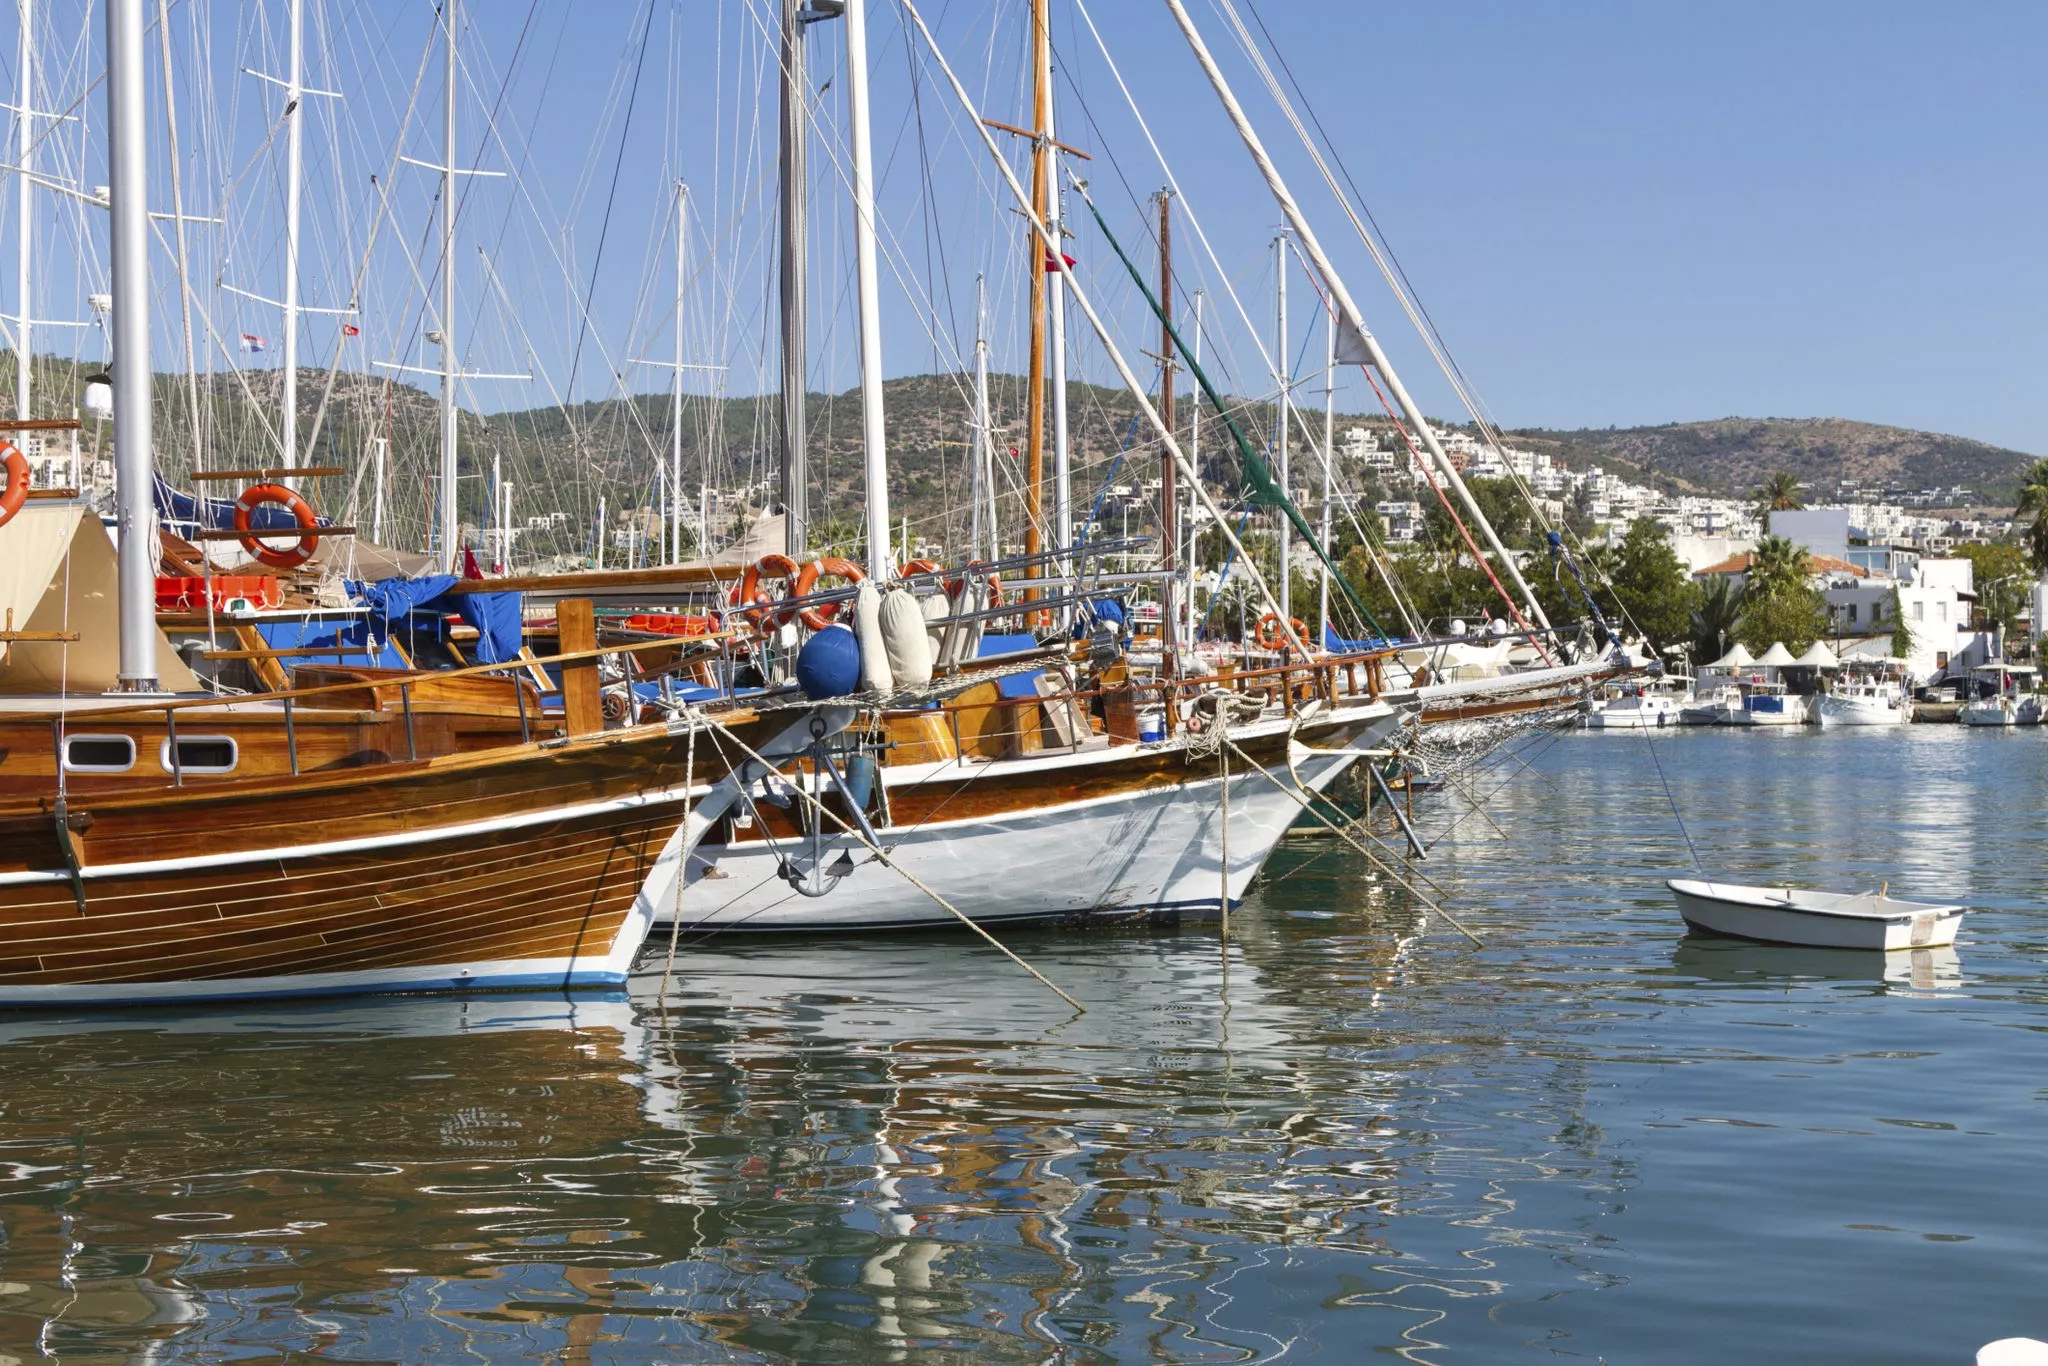 Milta Bodrum Marina in Turkey, Central Asia | Yachting - Rated 3.7